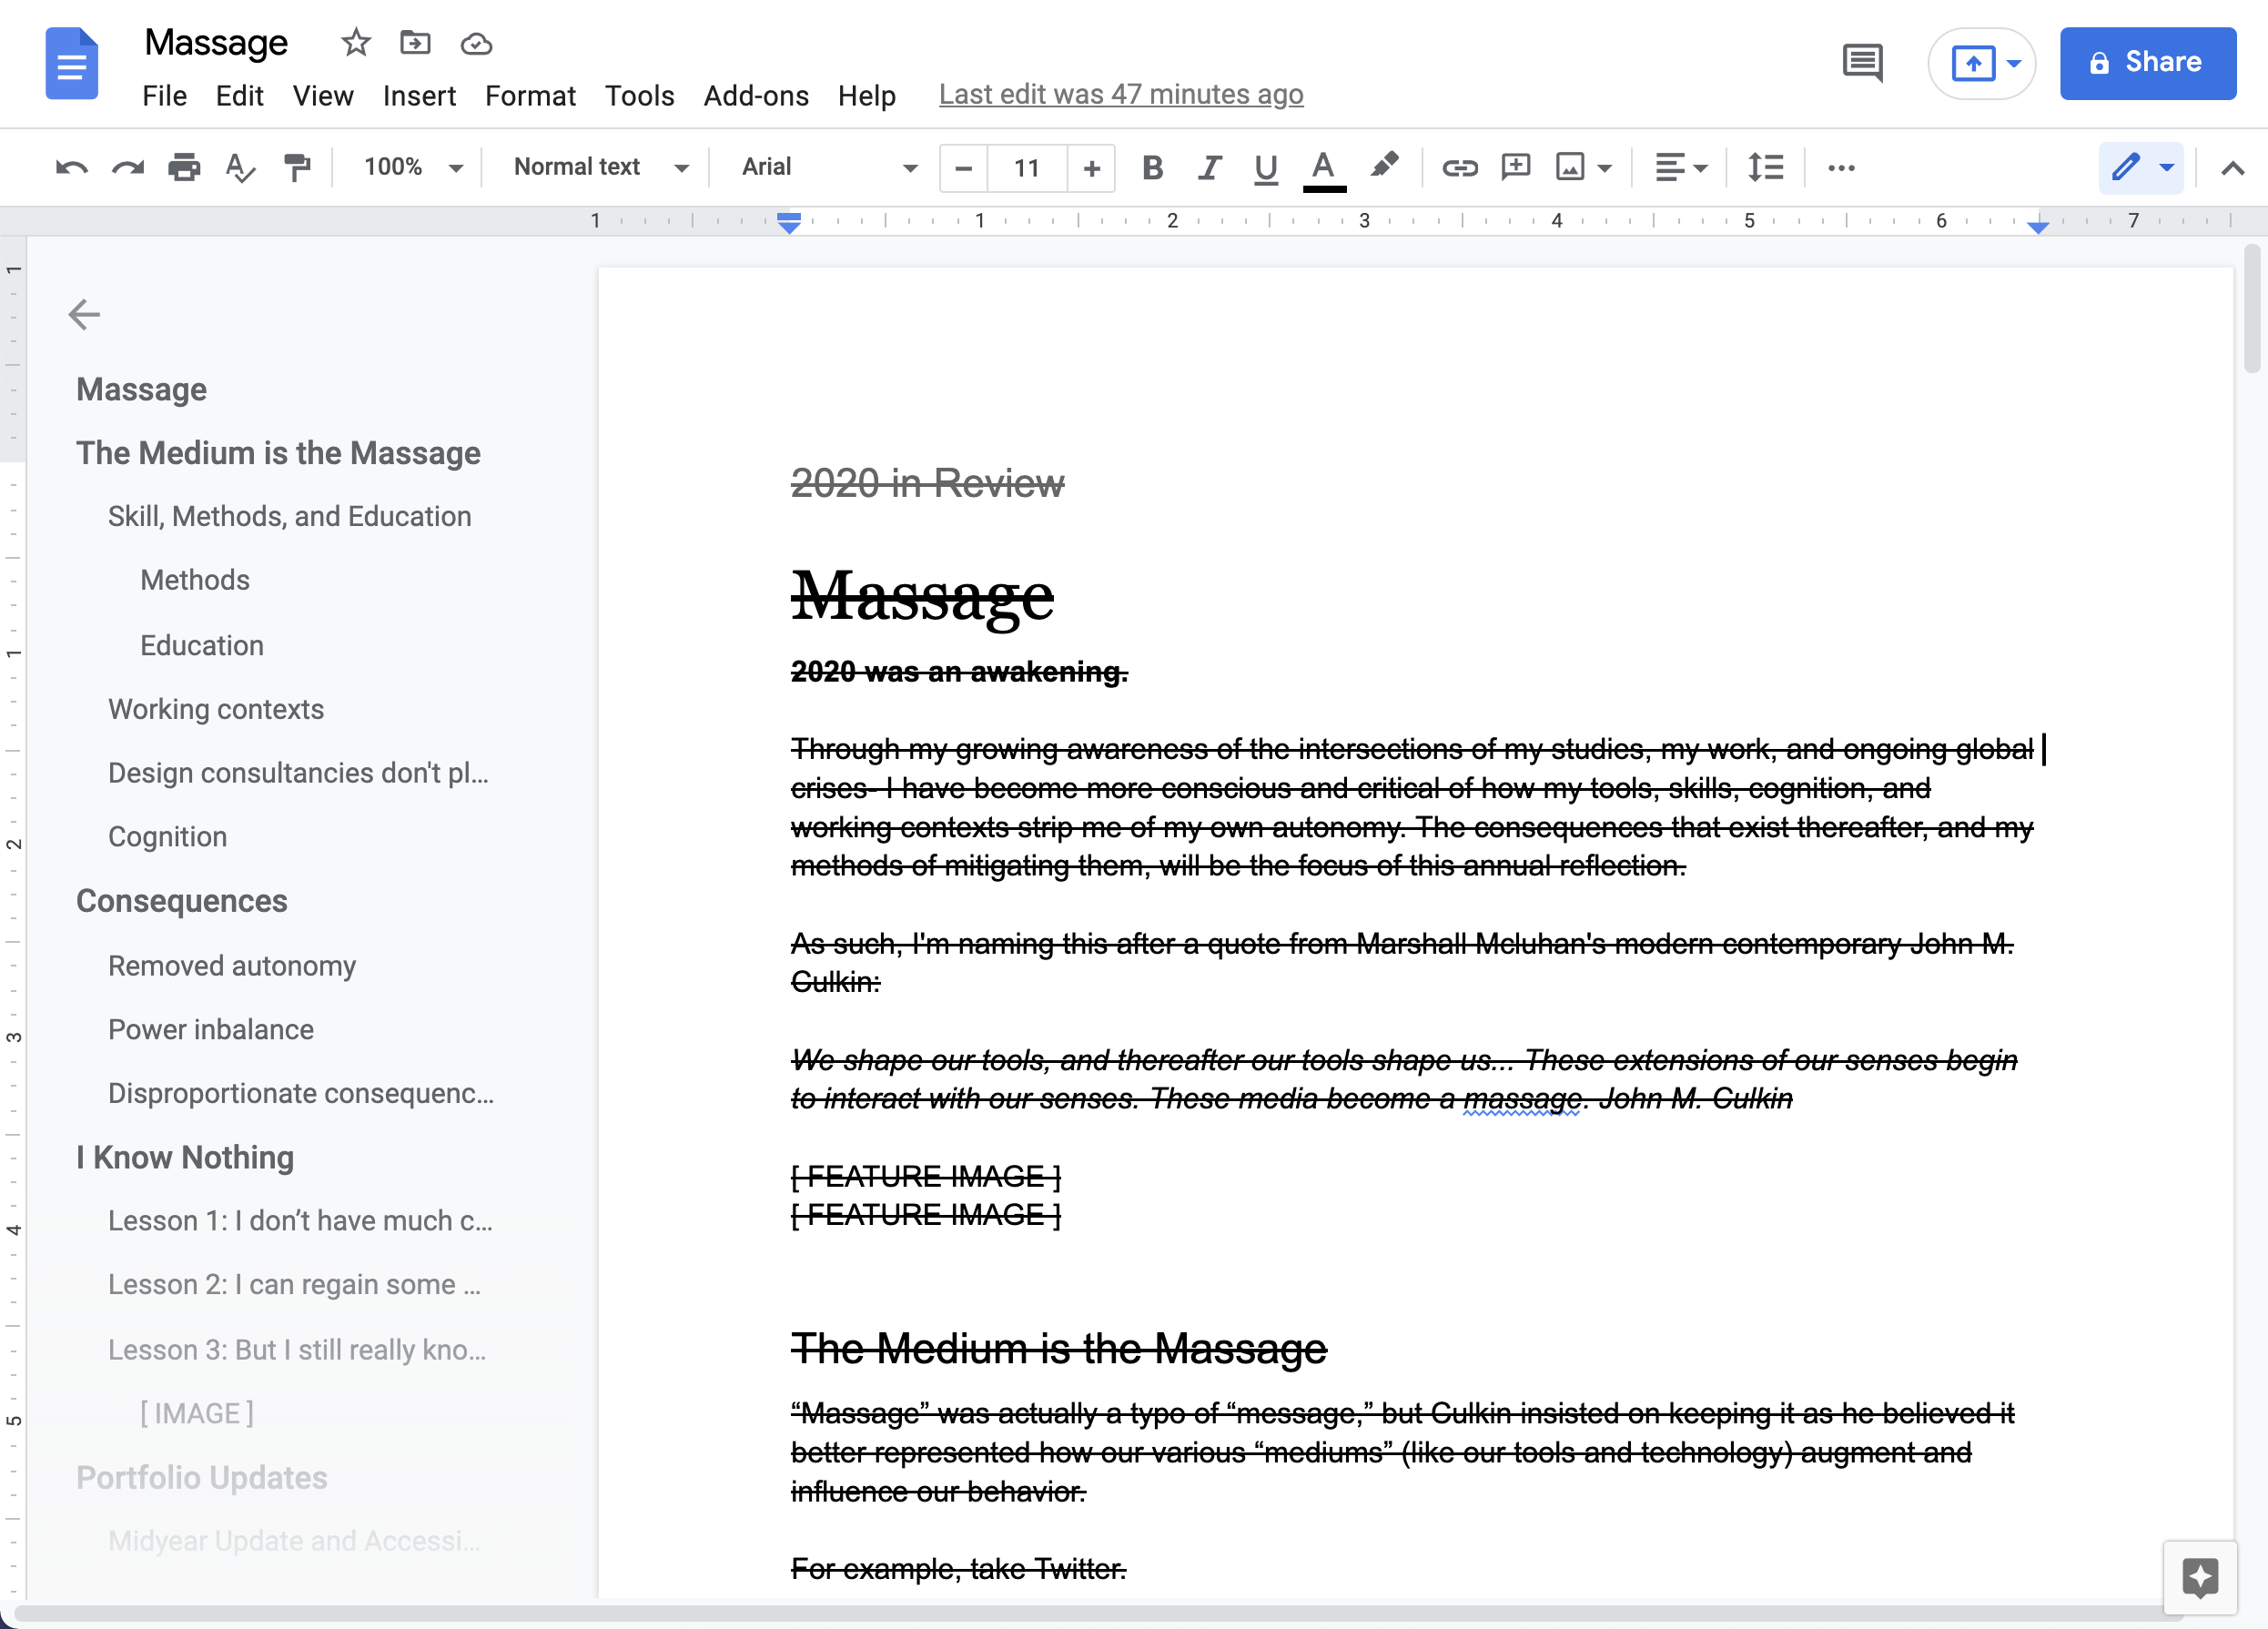 My original iteration on google docs was titled the medium is the massage and was chalk full of designer jargon.